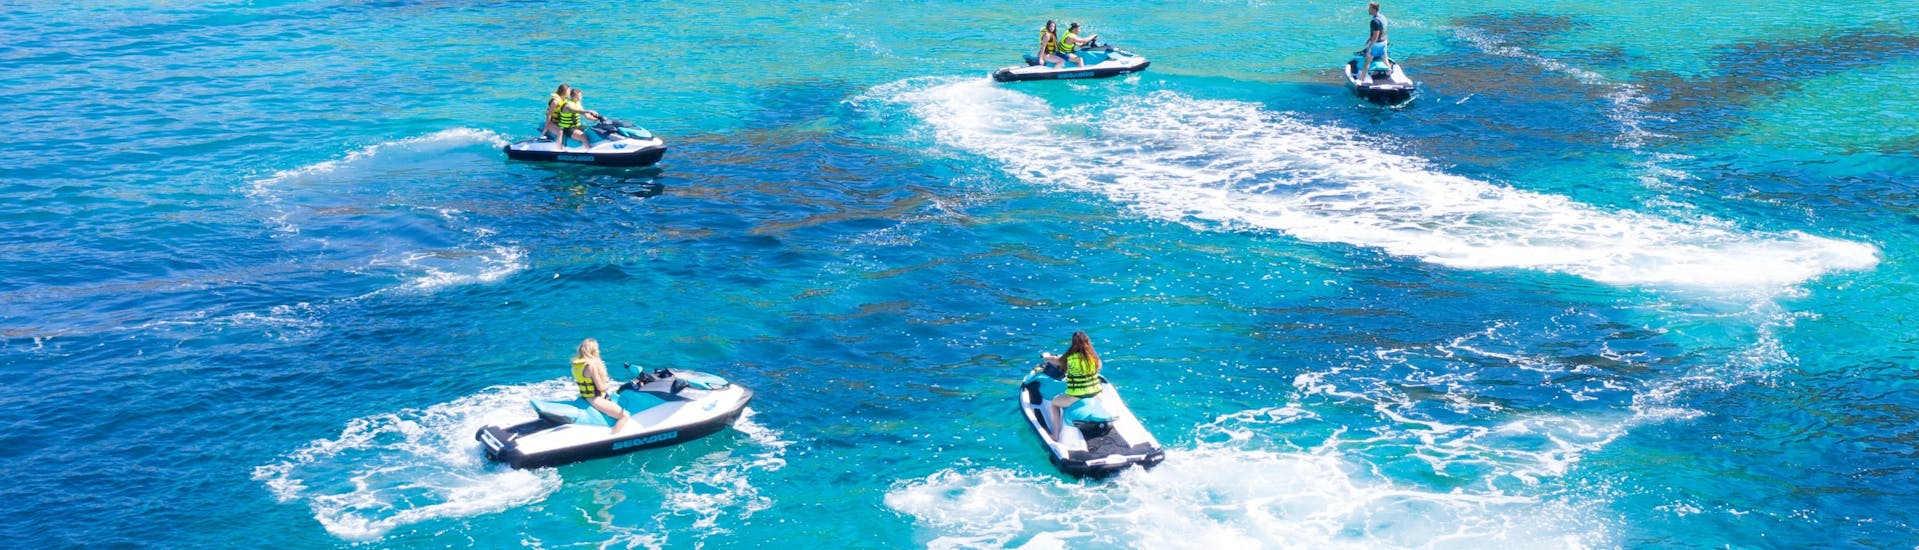 A group of people riding a jetski in the sea in Cala d'Or.